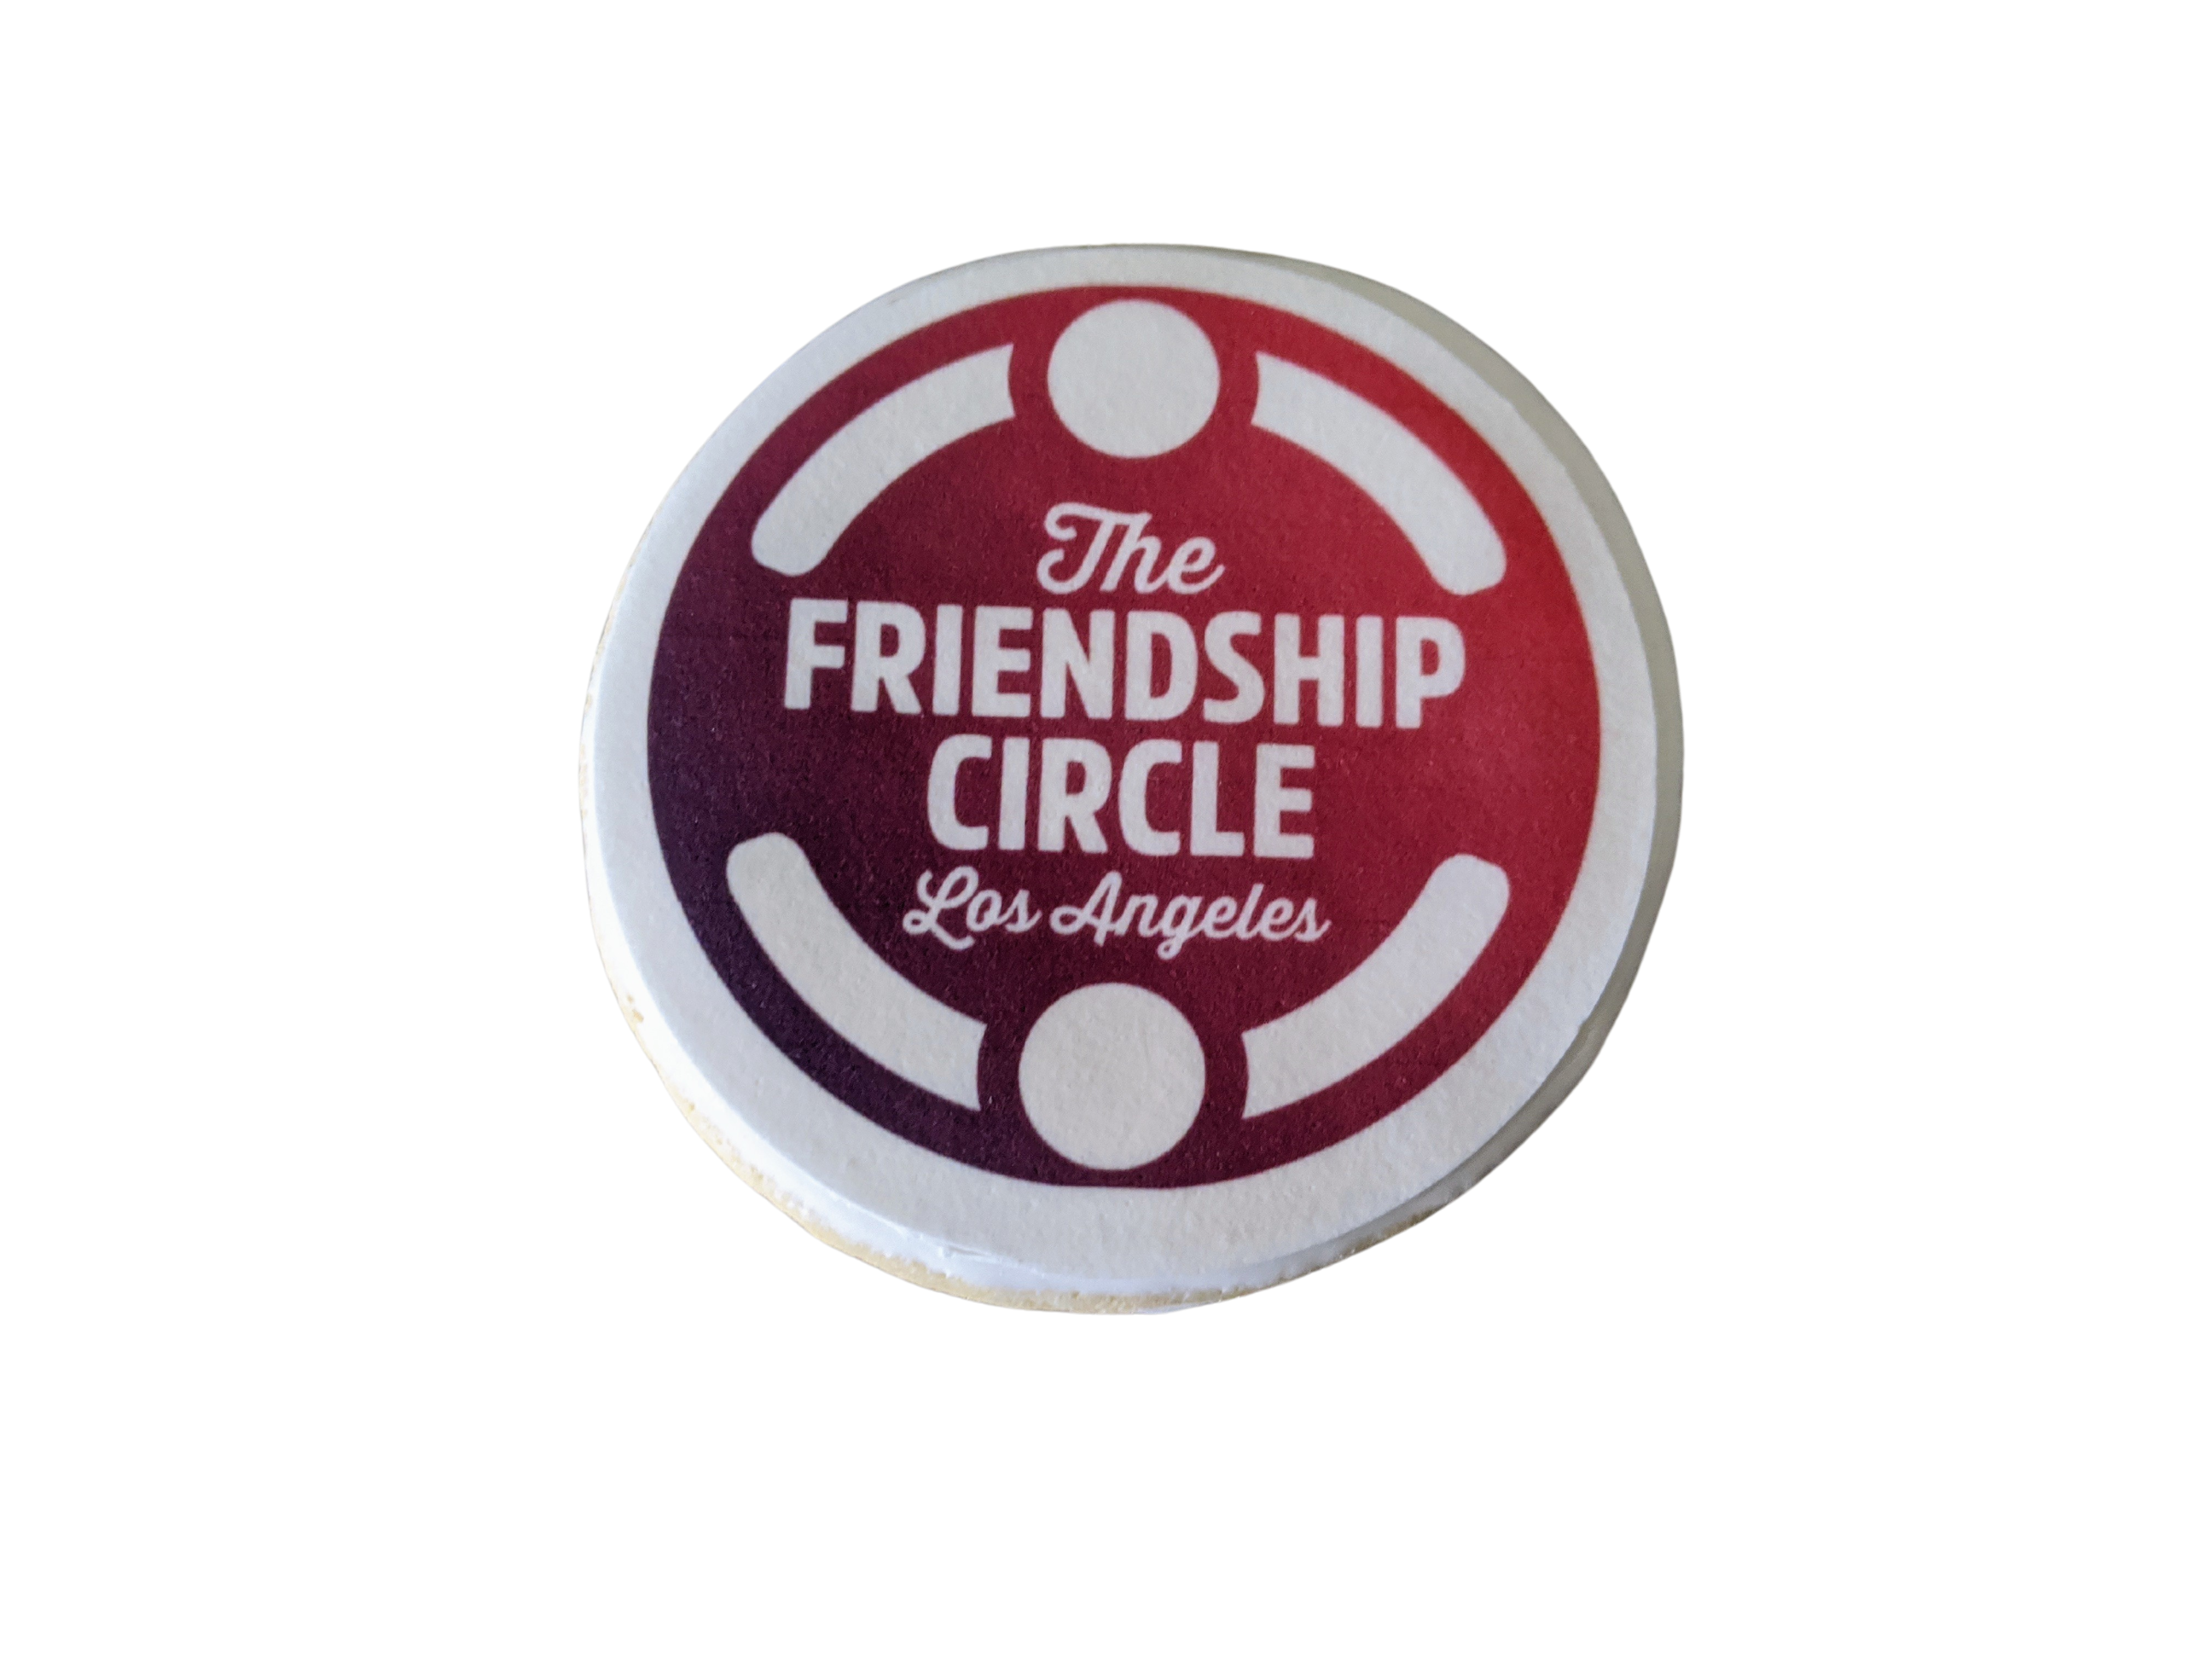 The Friendship Circle Logo On A Cookie